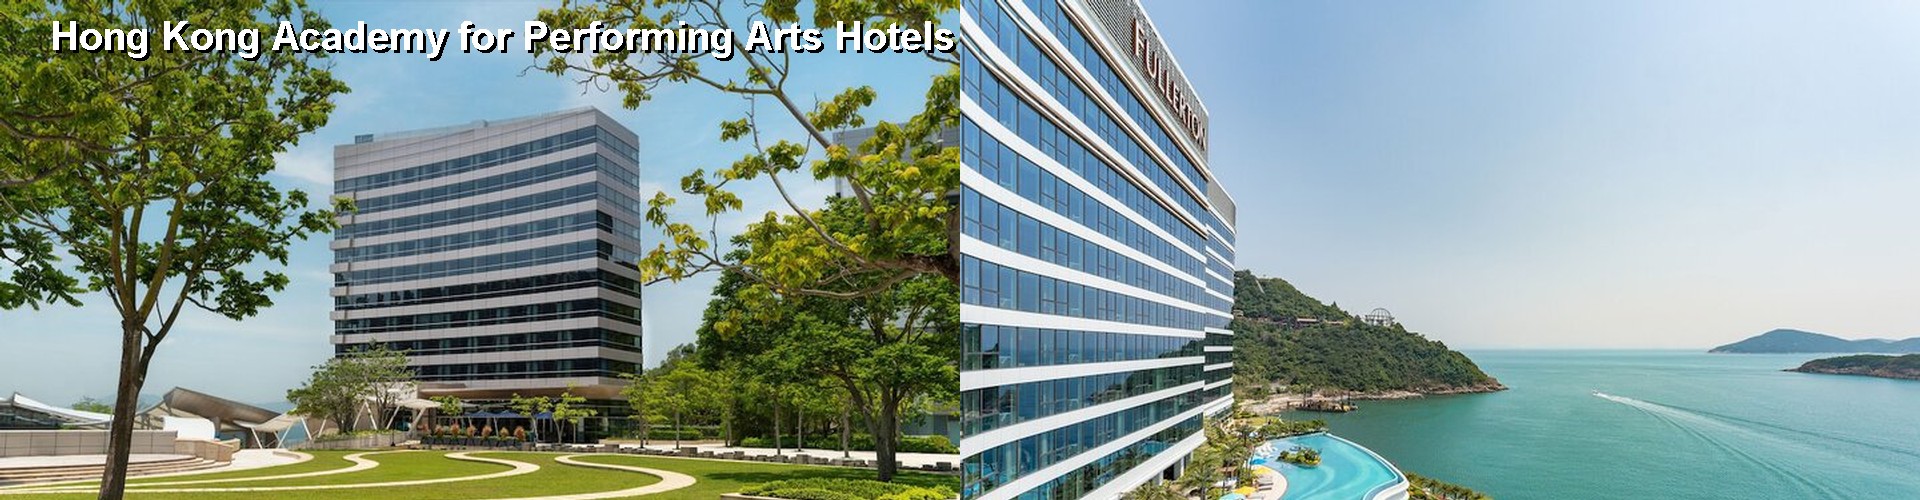 5 Best Hotels near Hong Kong Academy for Performing Arts